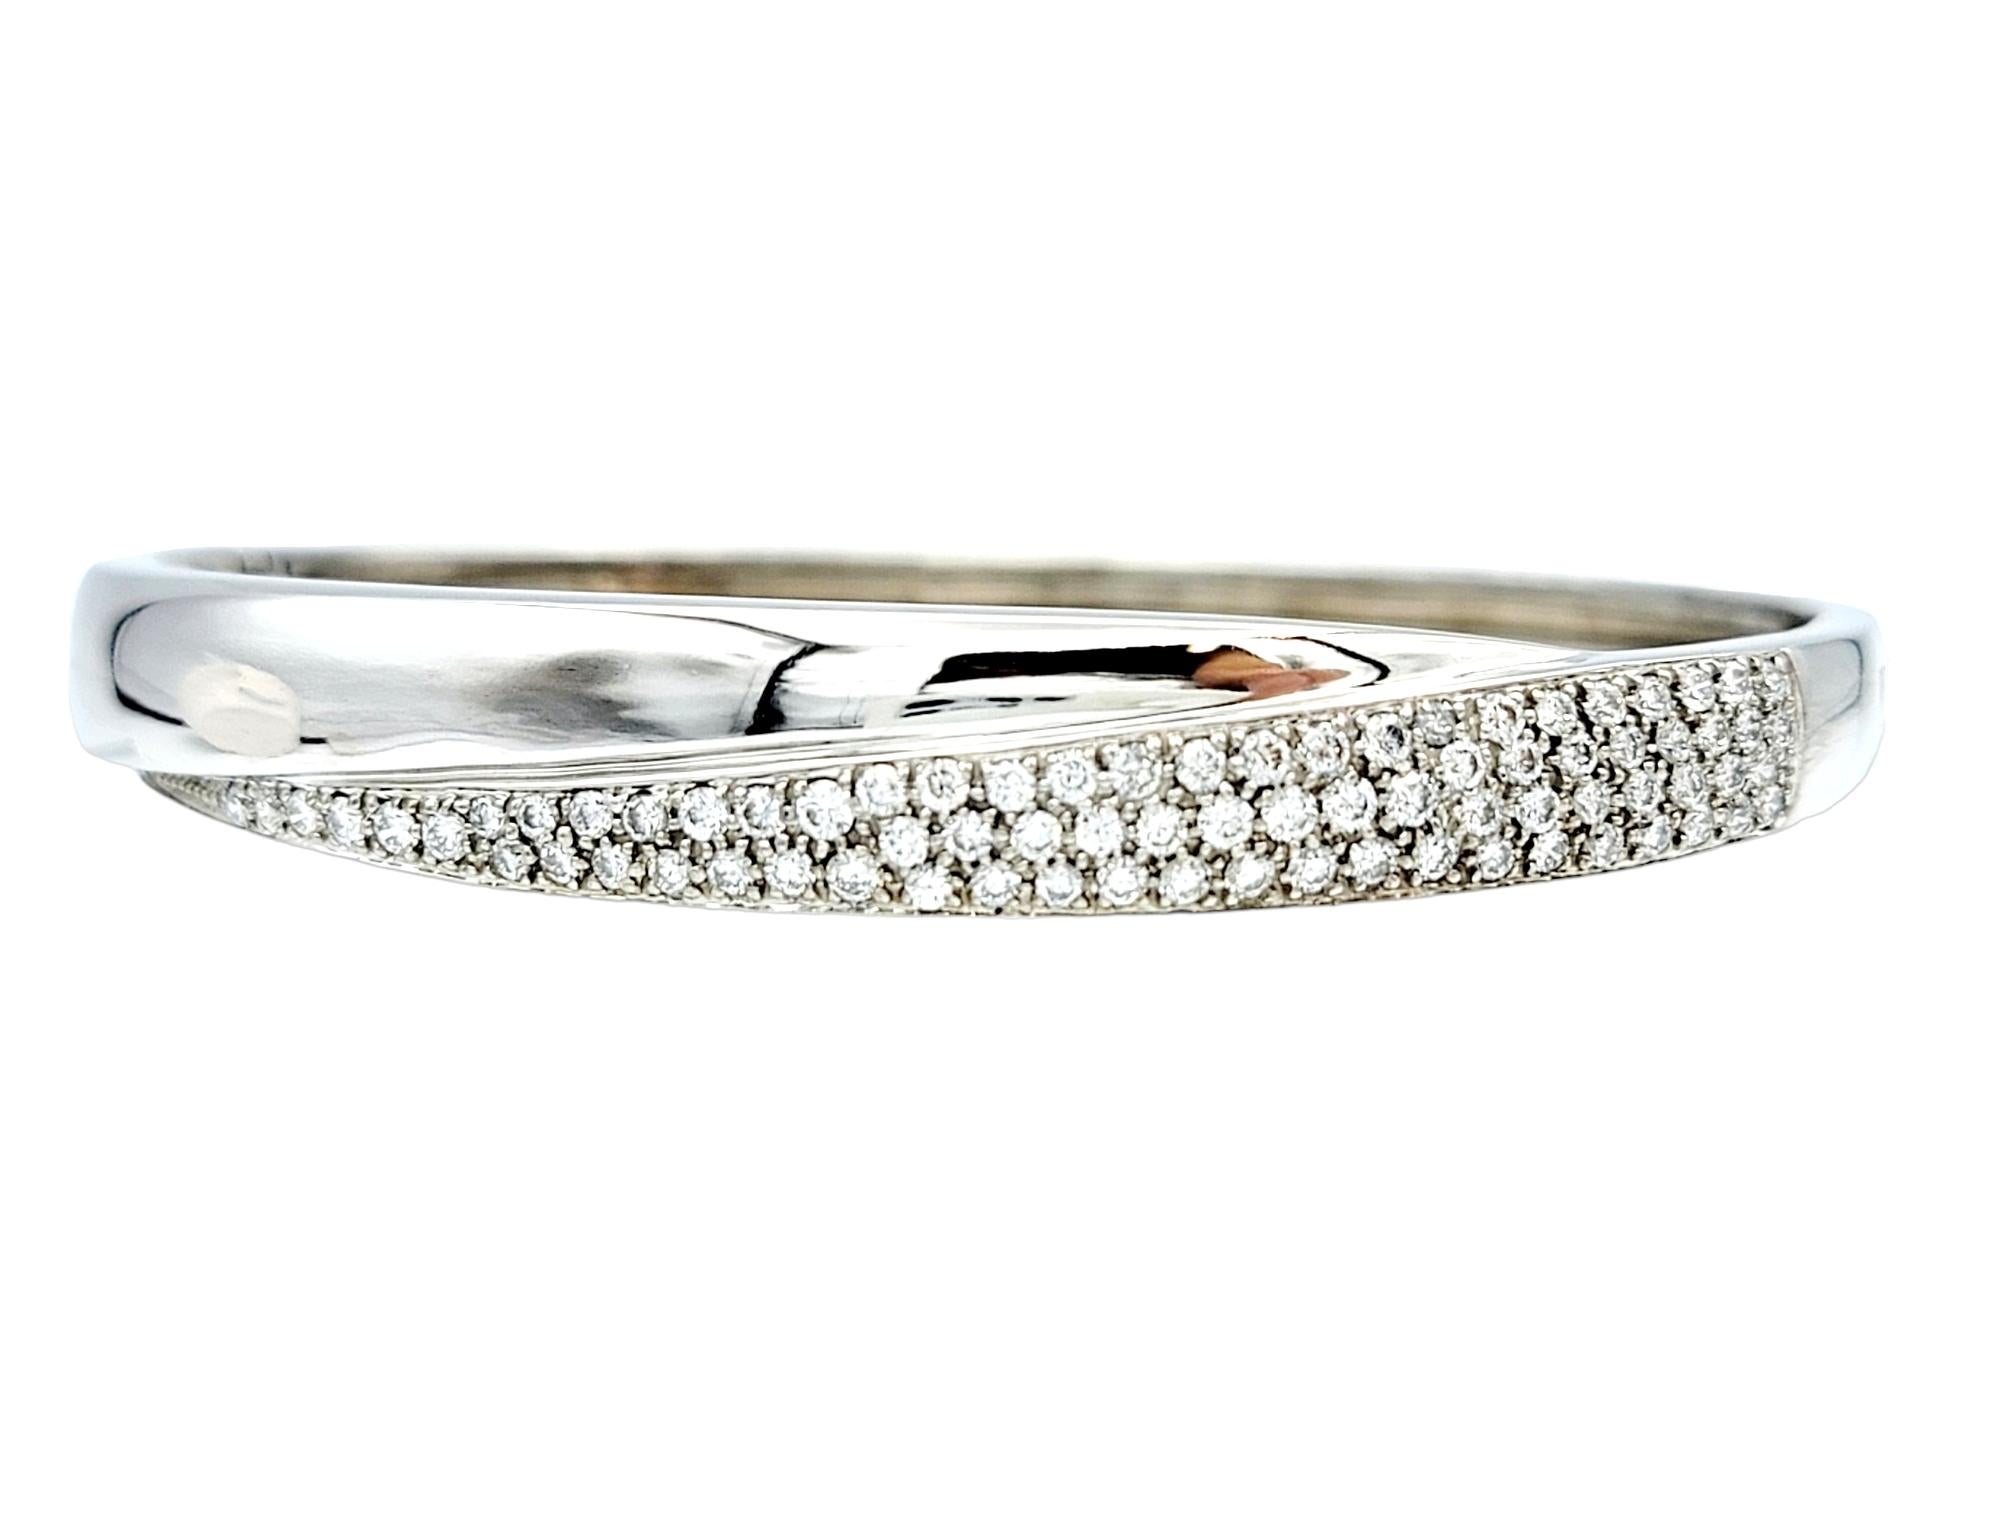 This hinged bangle bracelet, crafted in exquisite 14 karat white gold, embodies timeless elegance. Its design features a captivating and harmonious overlapping or layered design. The first layer is adorned with a stunning array of pave diamonds,